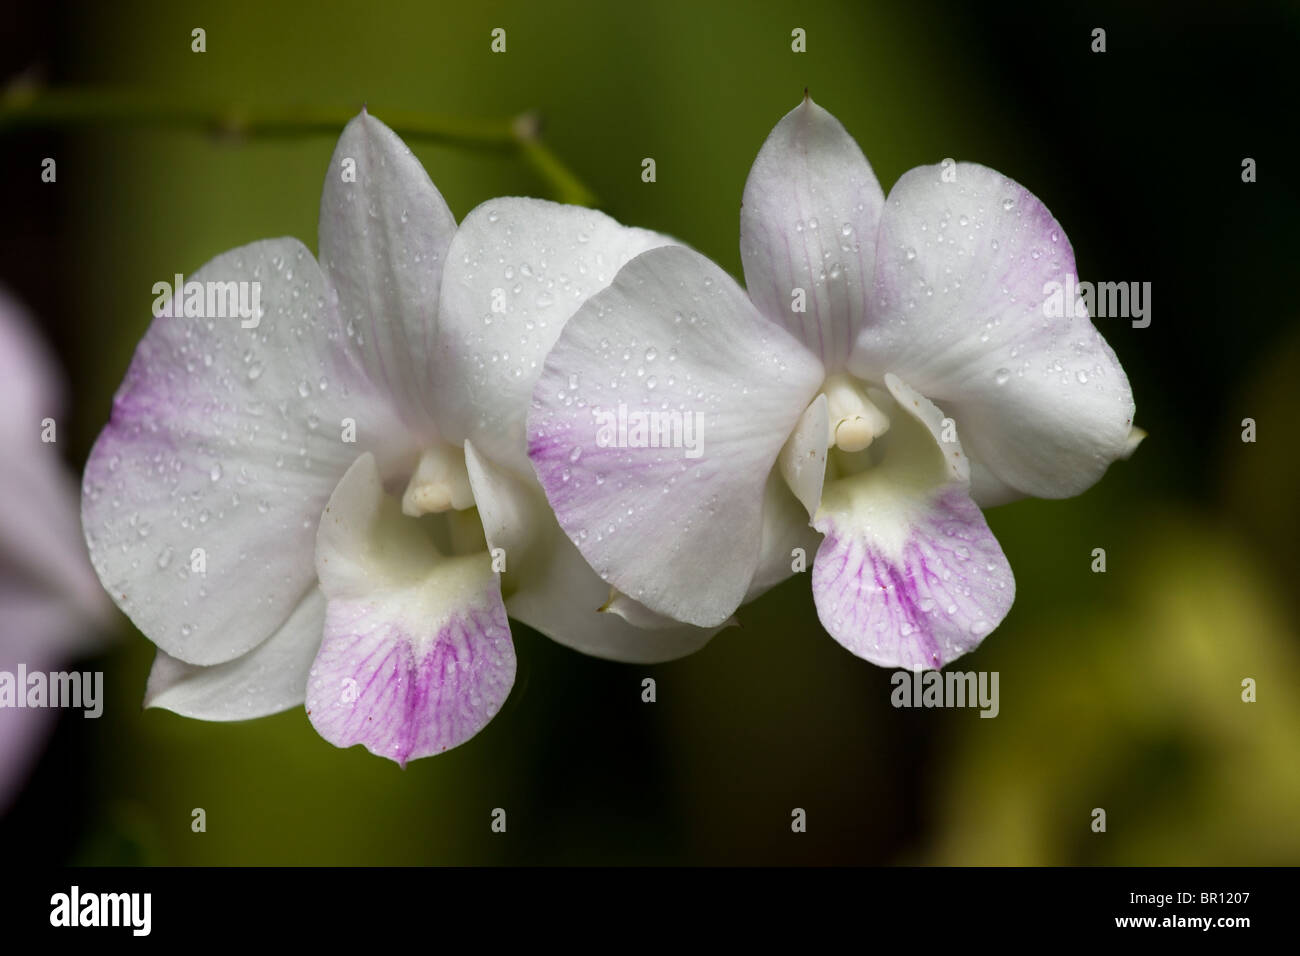 White Orchid pair. Two white and purple orchids against a green background. Stock Photo